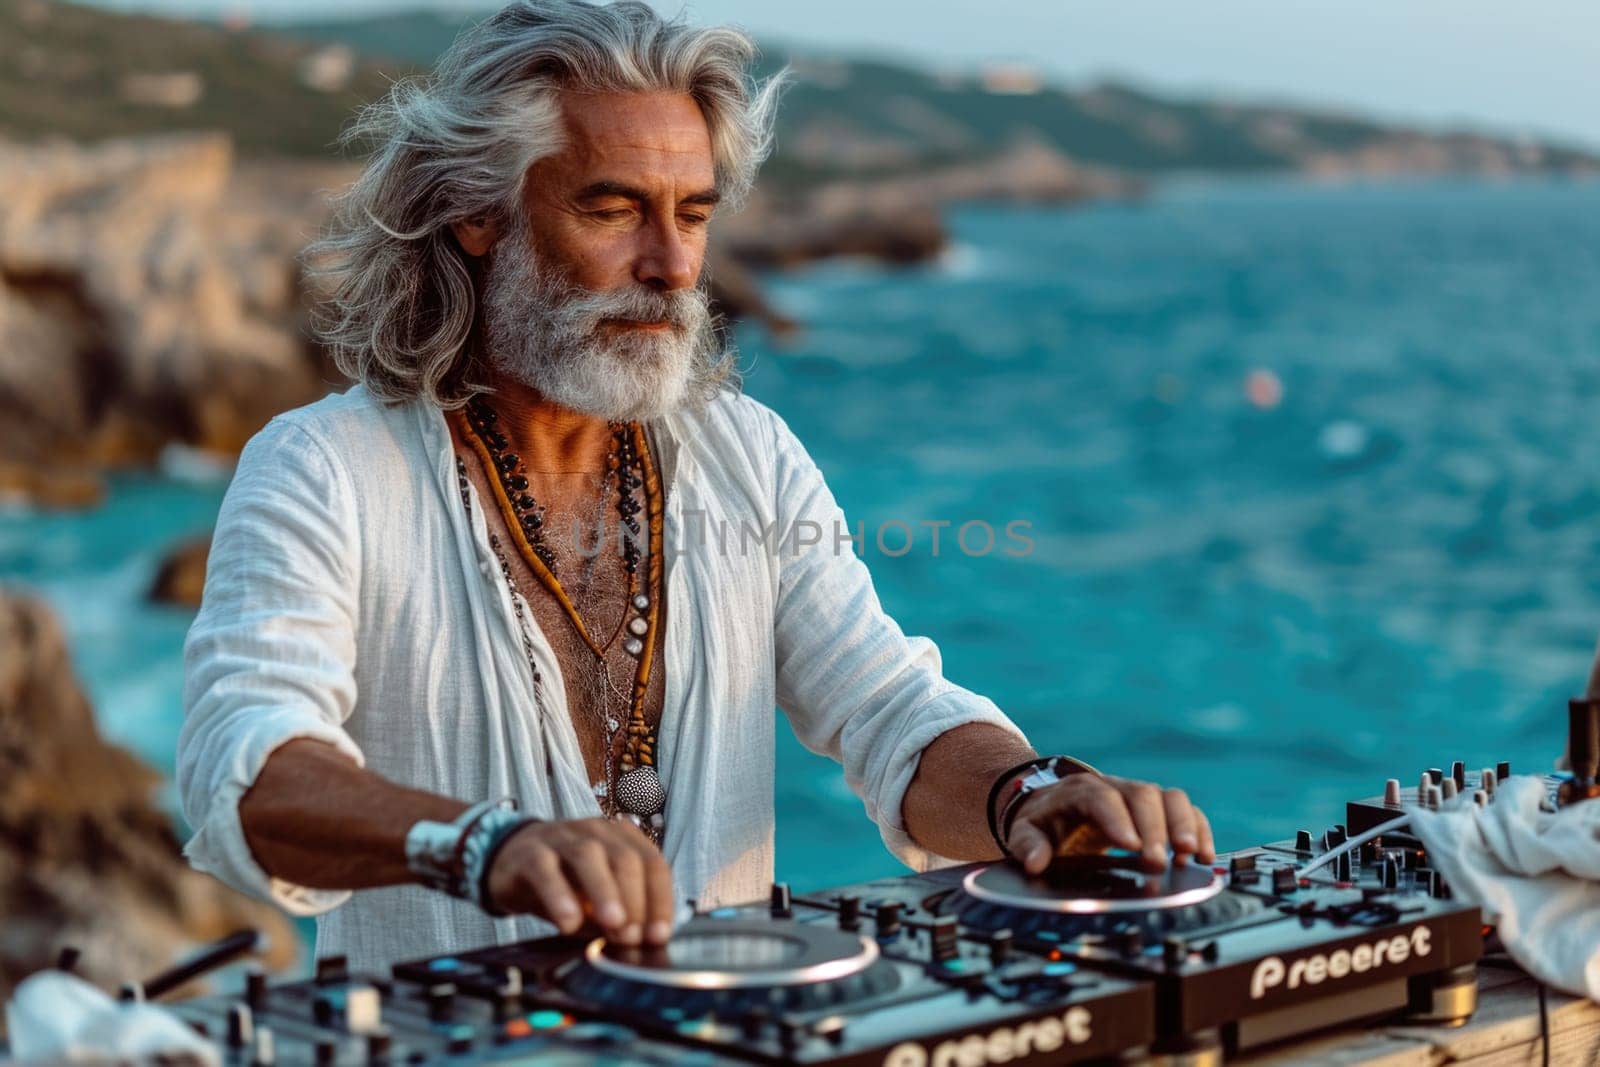 By the seashore, a gray-haired DJ captivates with music by Yurich32